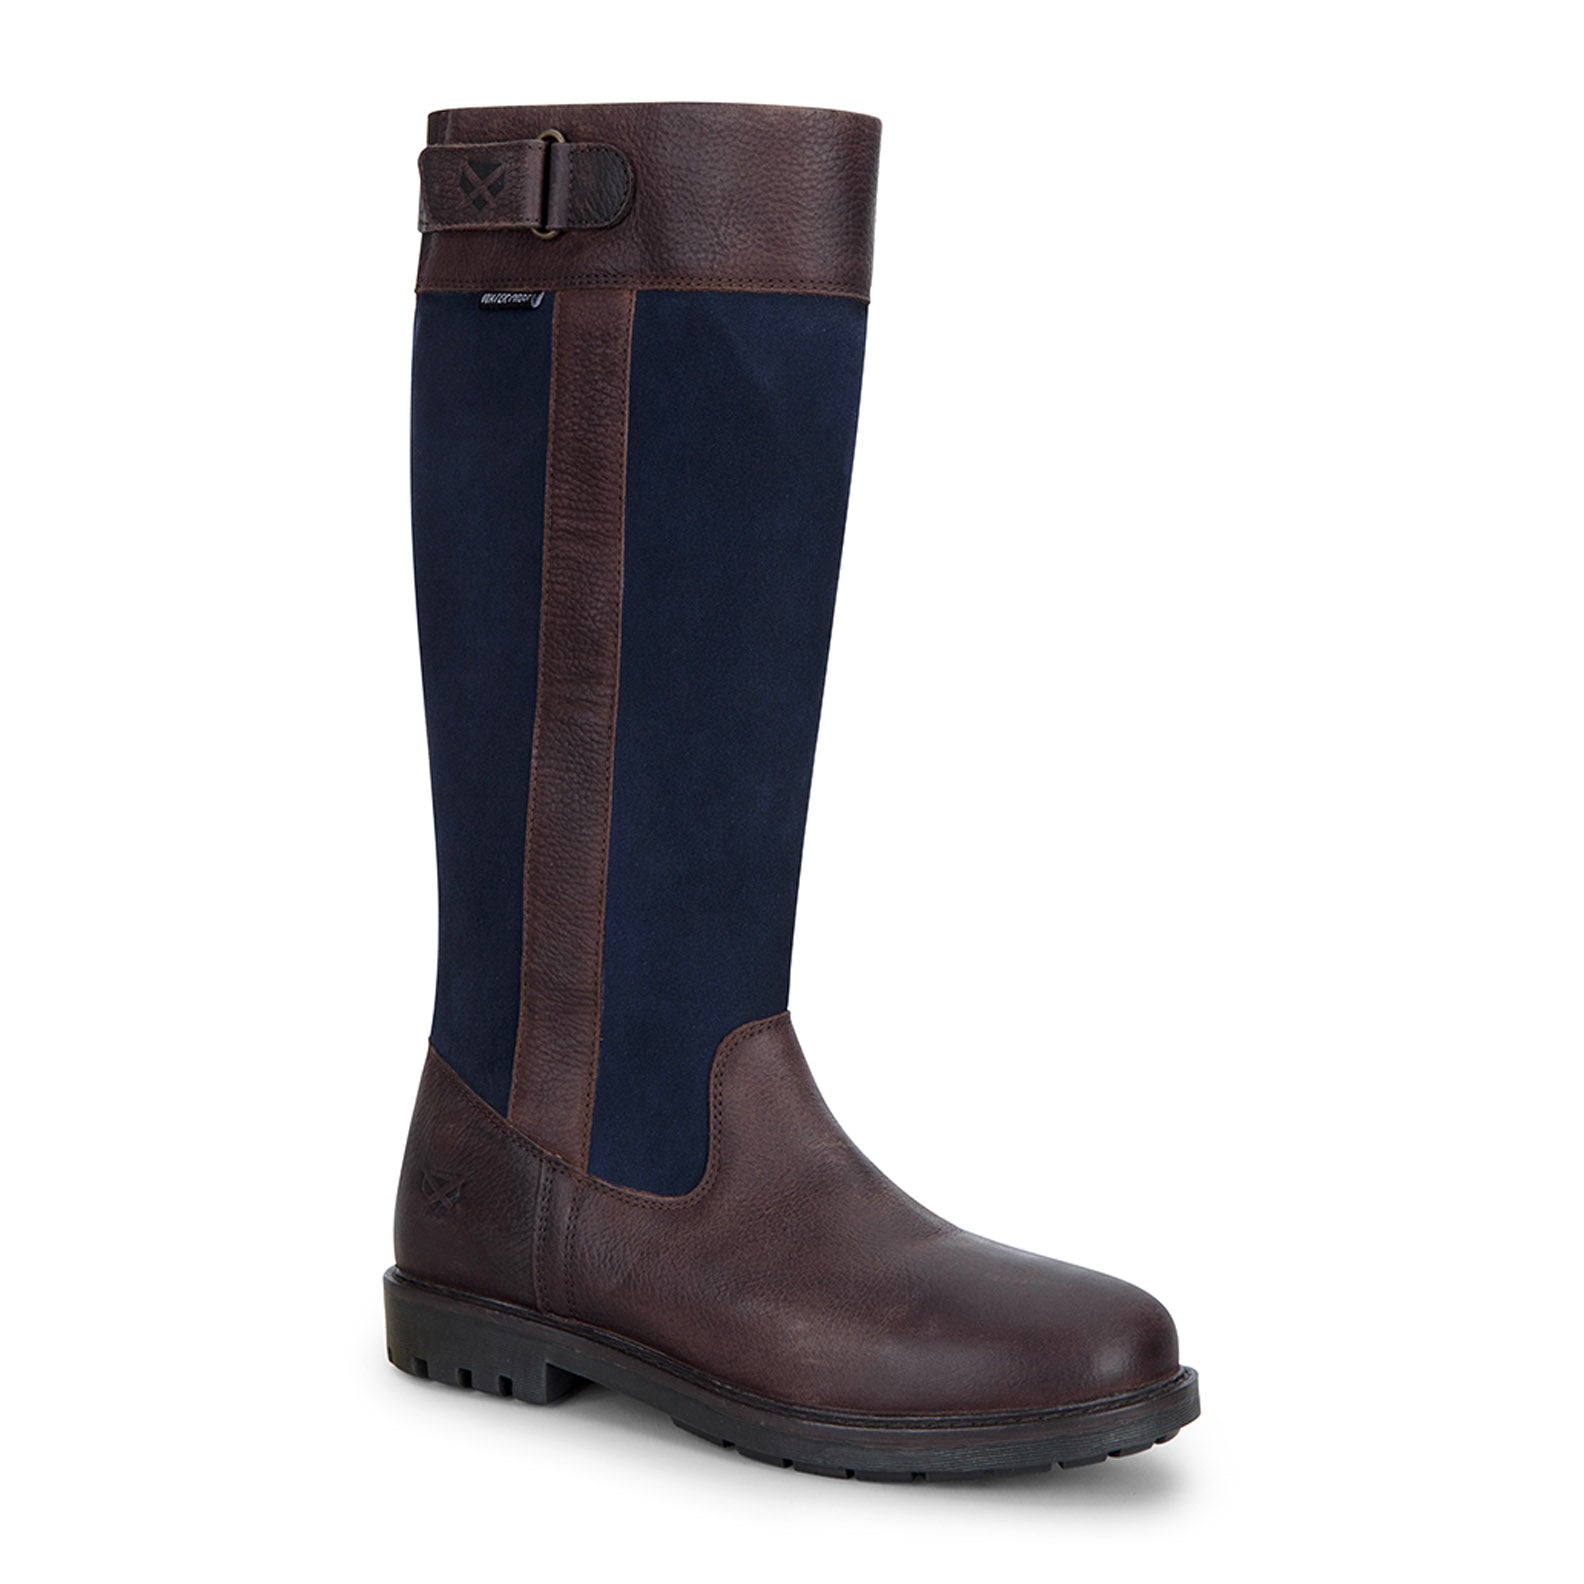 Hoggs of Fife Cleveland II Ladies Country Boots